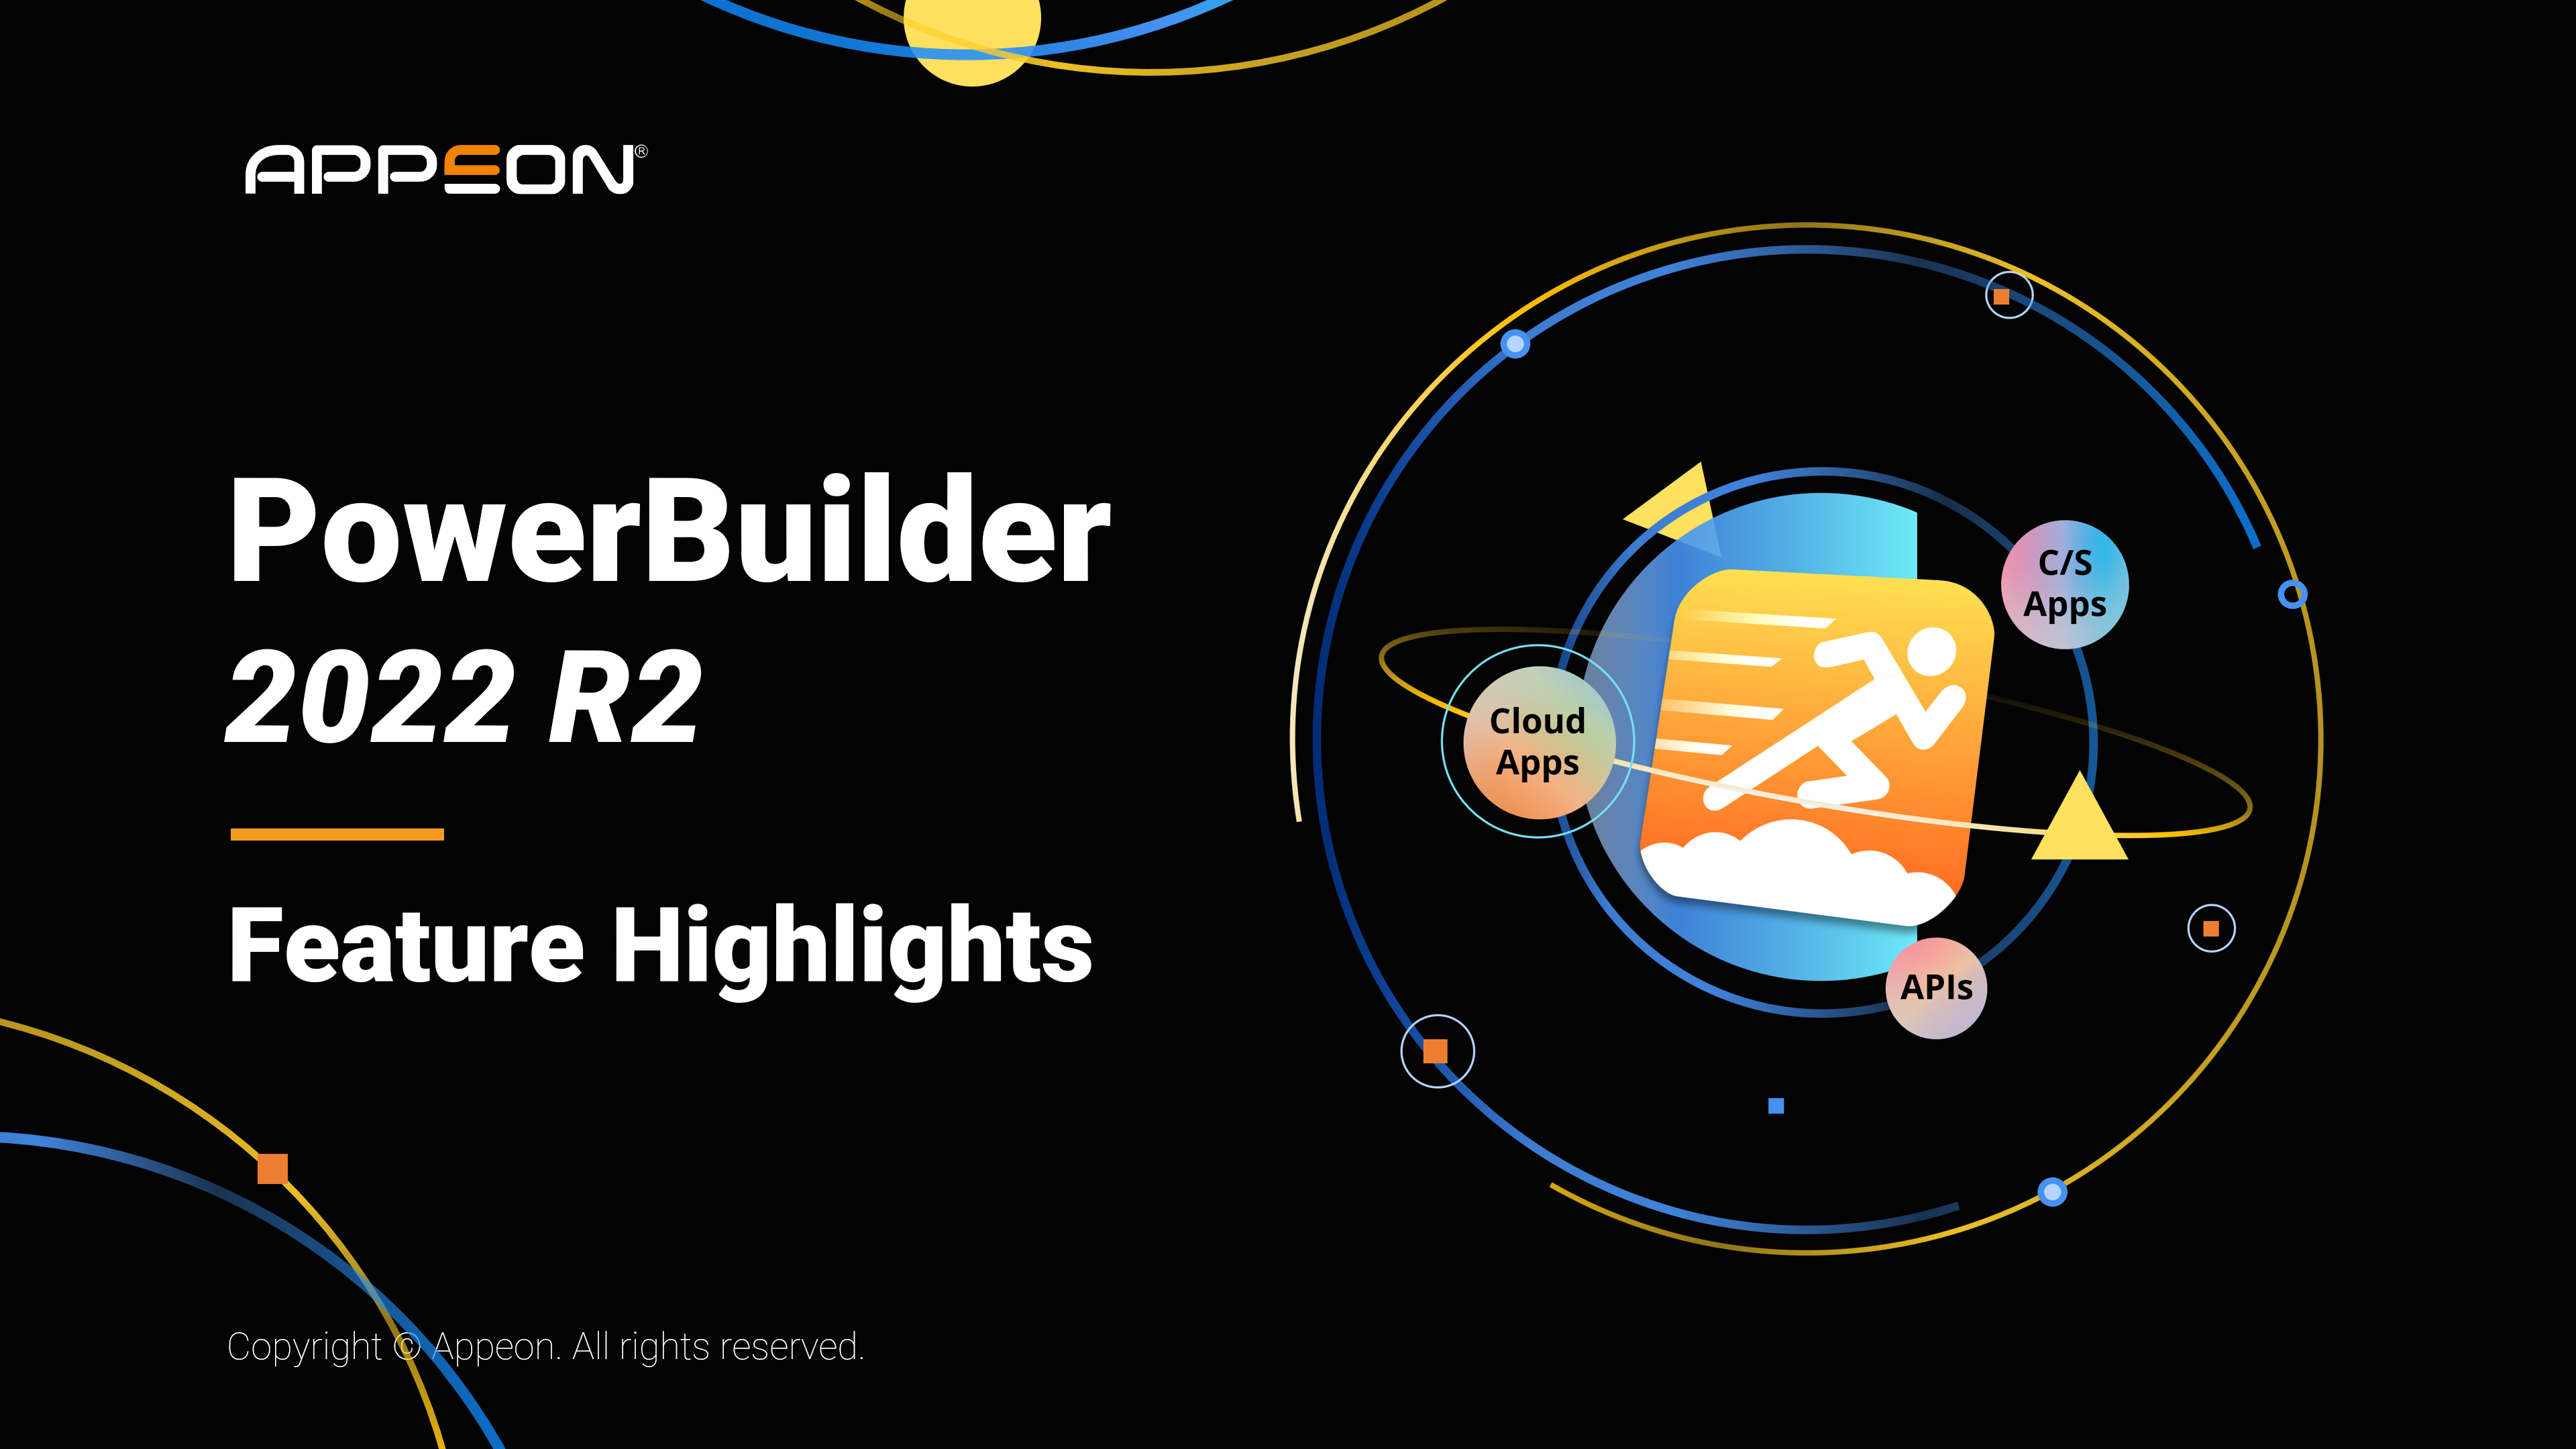 PowerBuilder 2022 R2: Available to Download